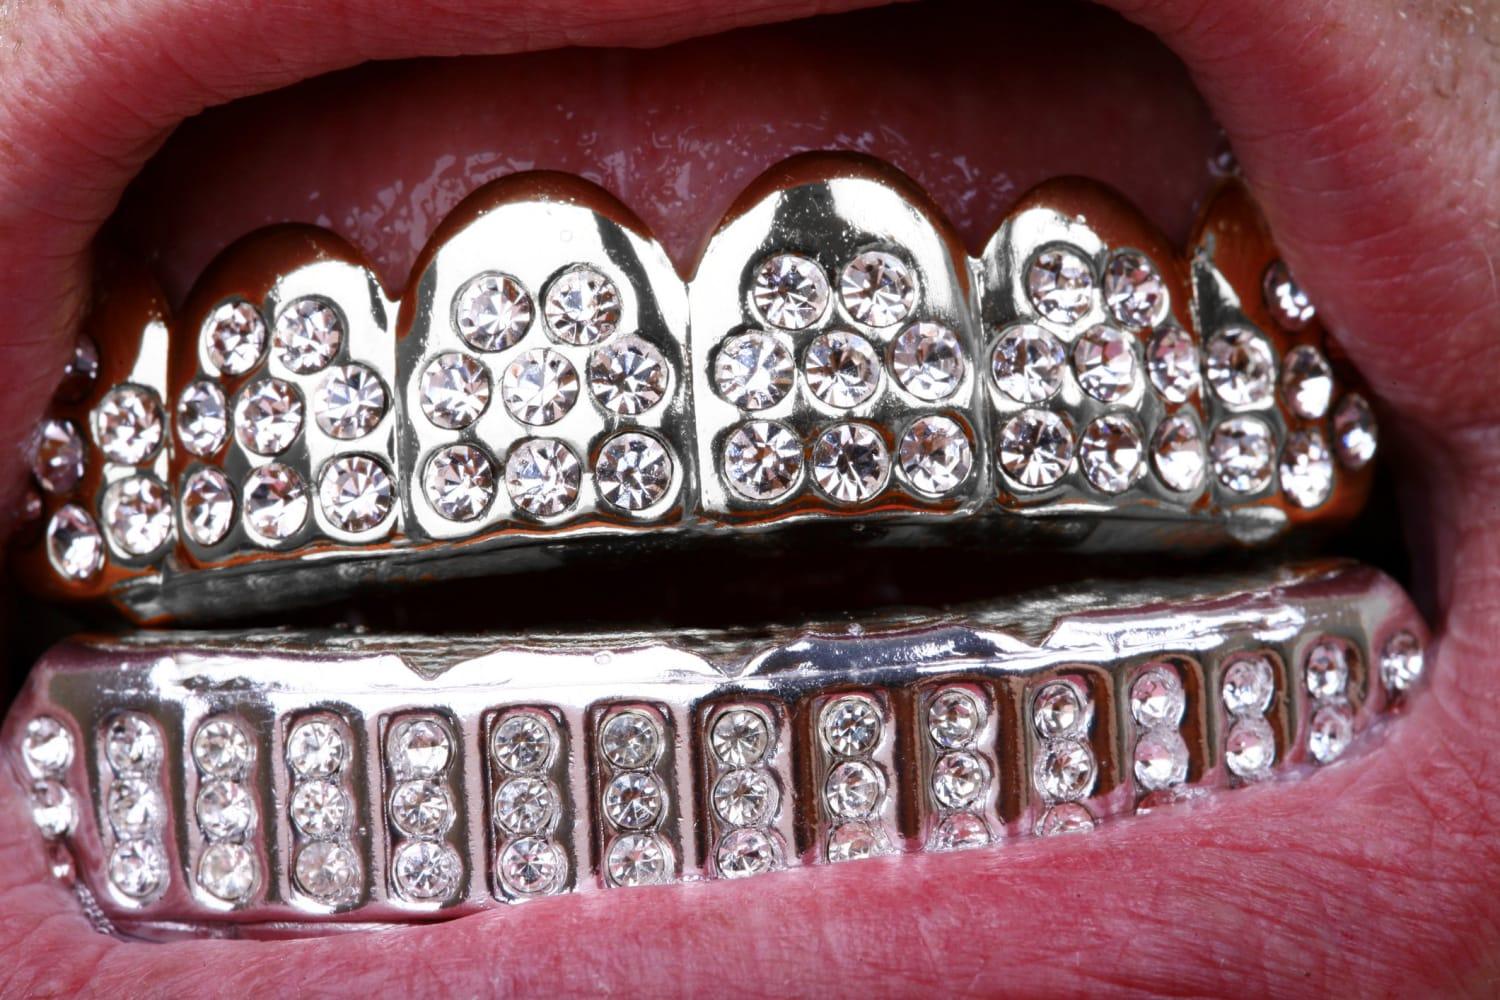 TYPES OF GRILLZ: WHAT ARE THEIR DIFFERENCES? - Seattle Gold Grillz